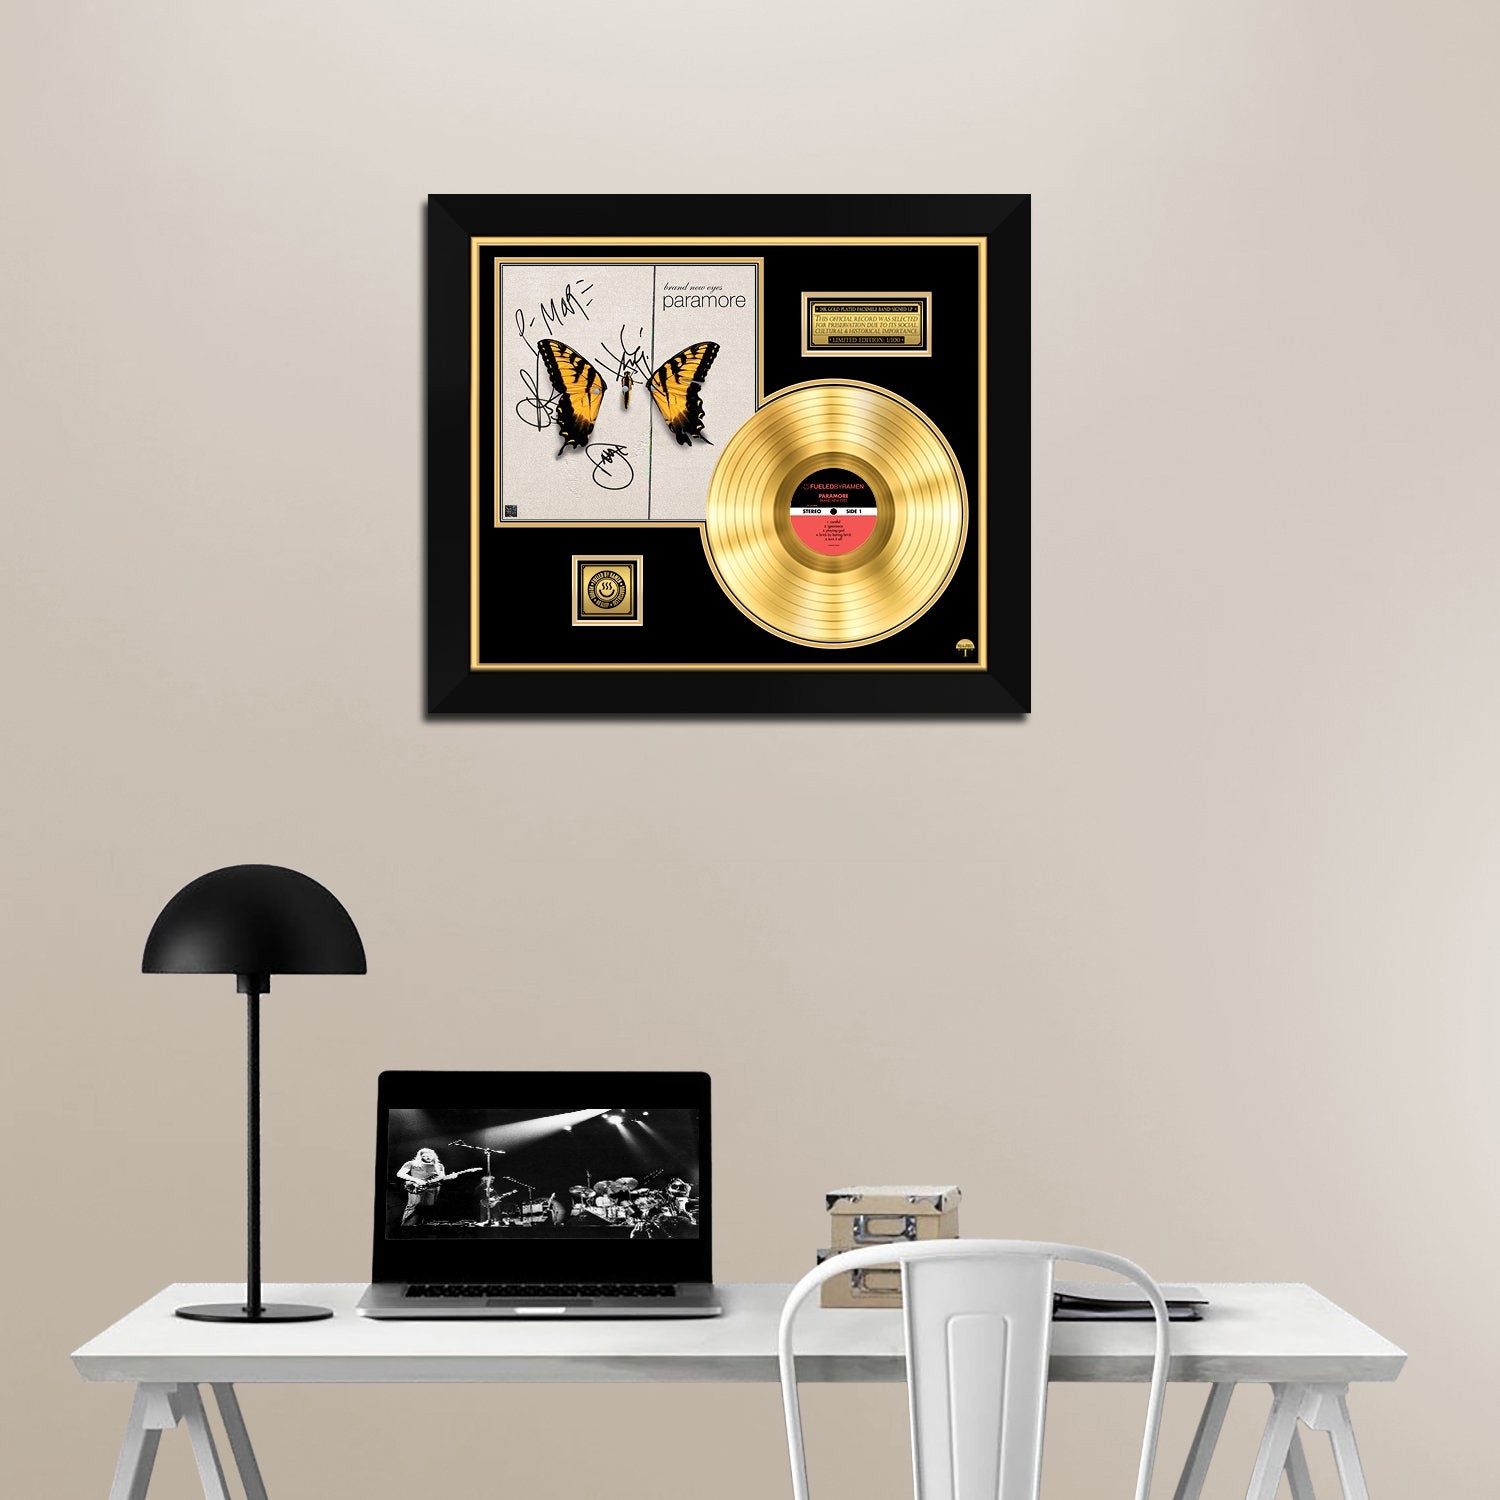 Paramore - Brand New Eyes Gold LP Limited Signature Edition Custom